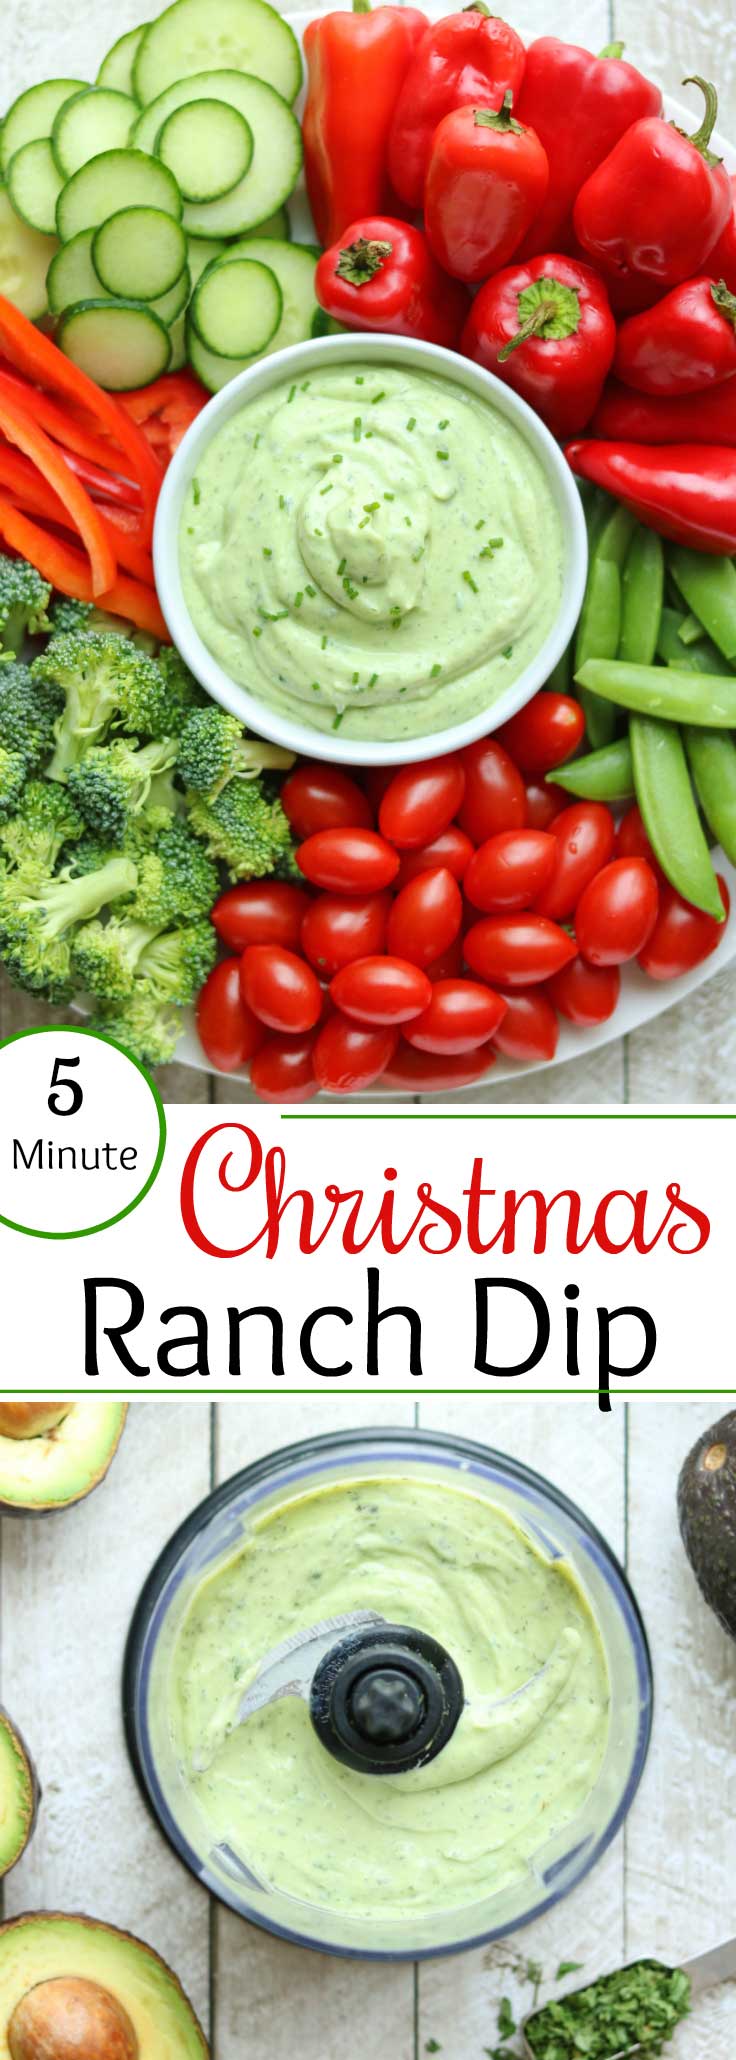 collage of two photos showing how to make this recipe as a Christmas appetizer dip with red and green veggies